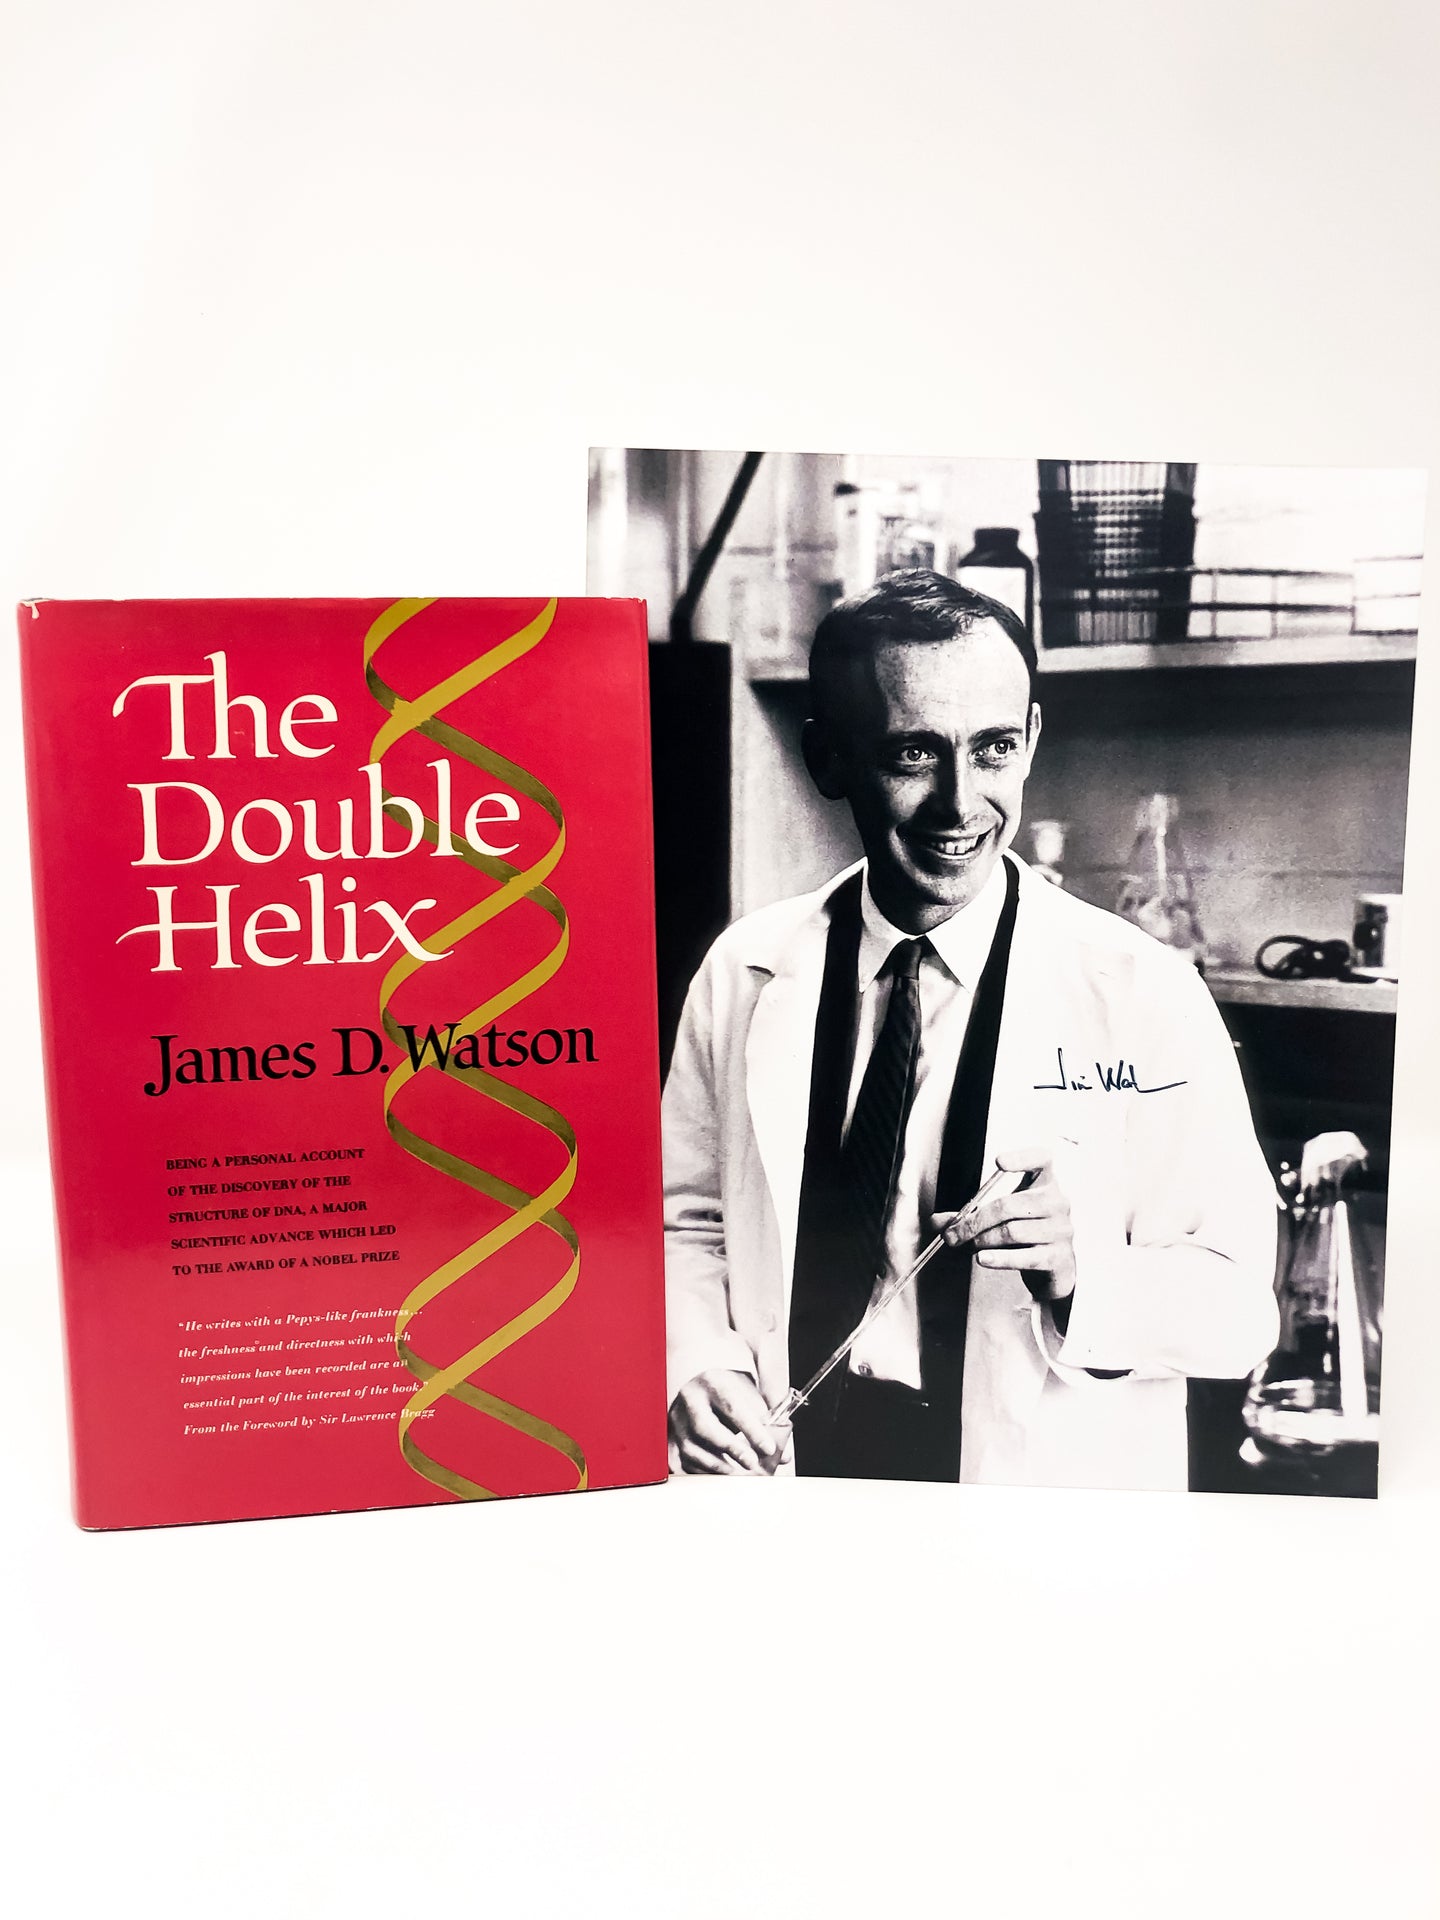 A first edition of The Double Helix together with a photograph signed by James Watson